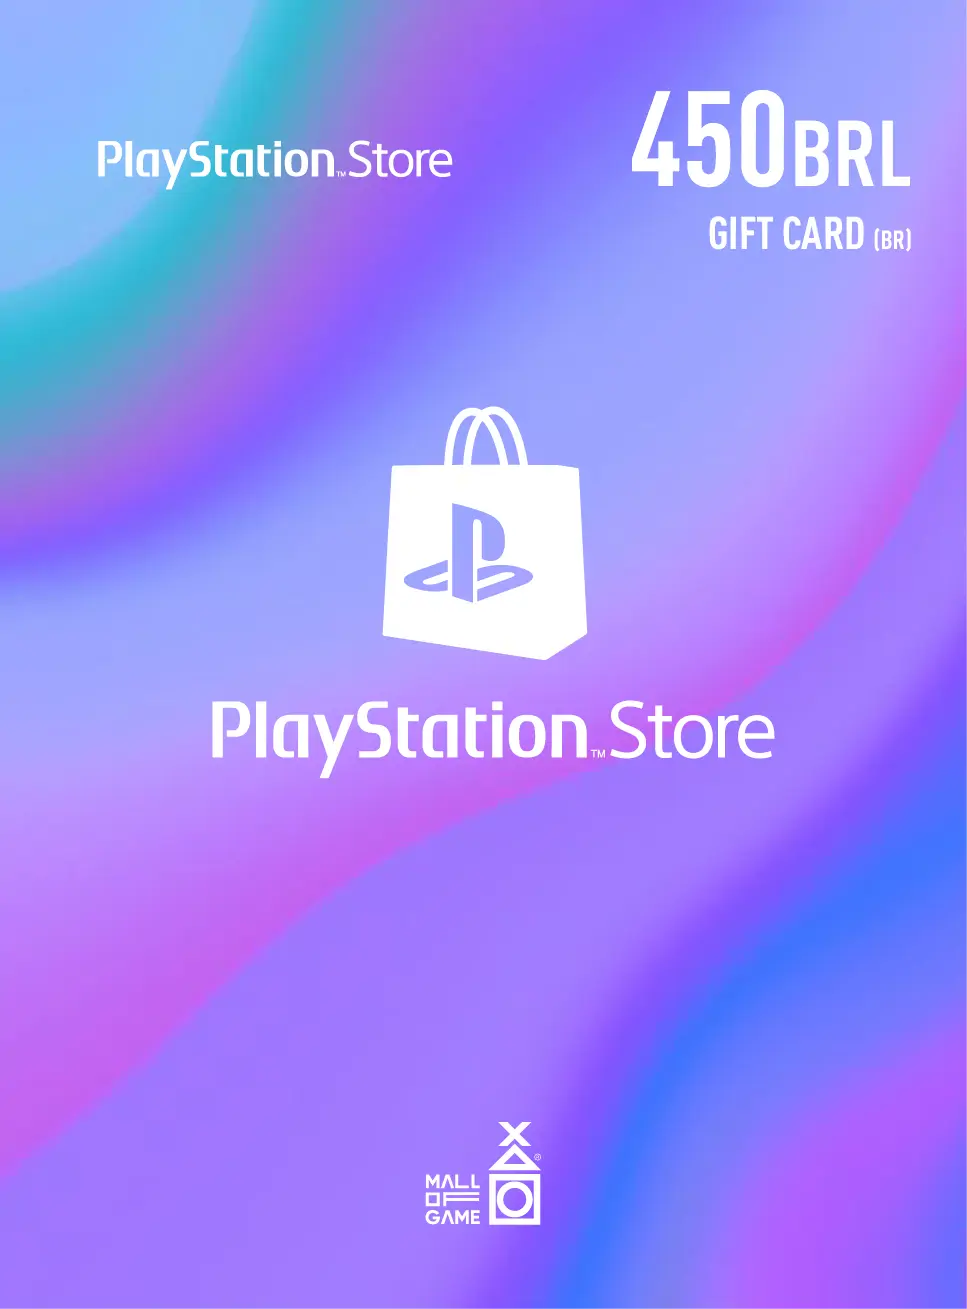 PlayStation™Store BRL450 Gift Cards (BR)